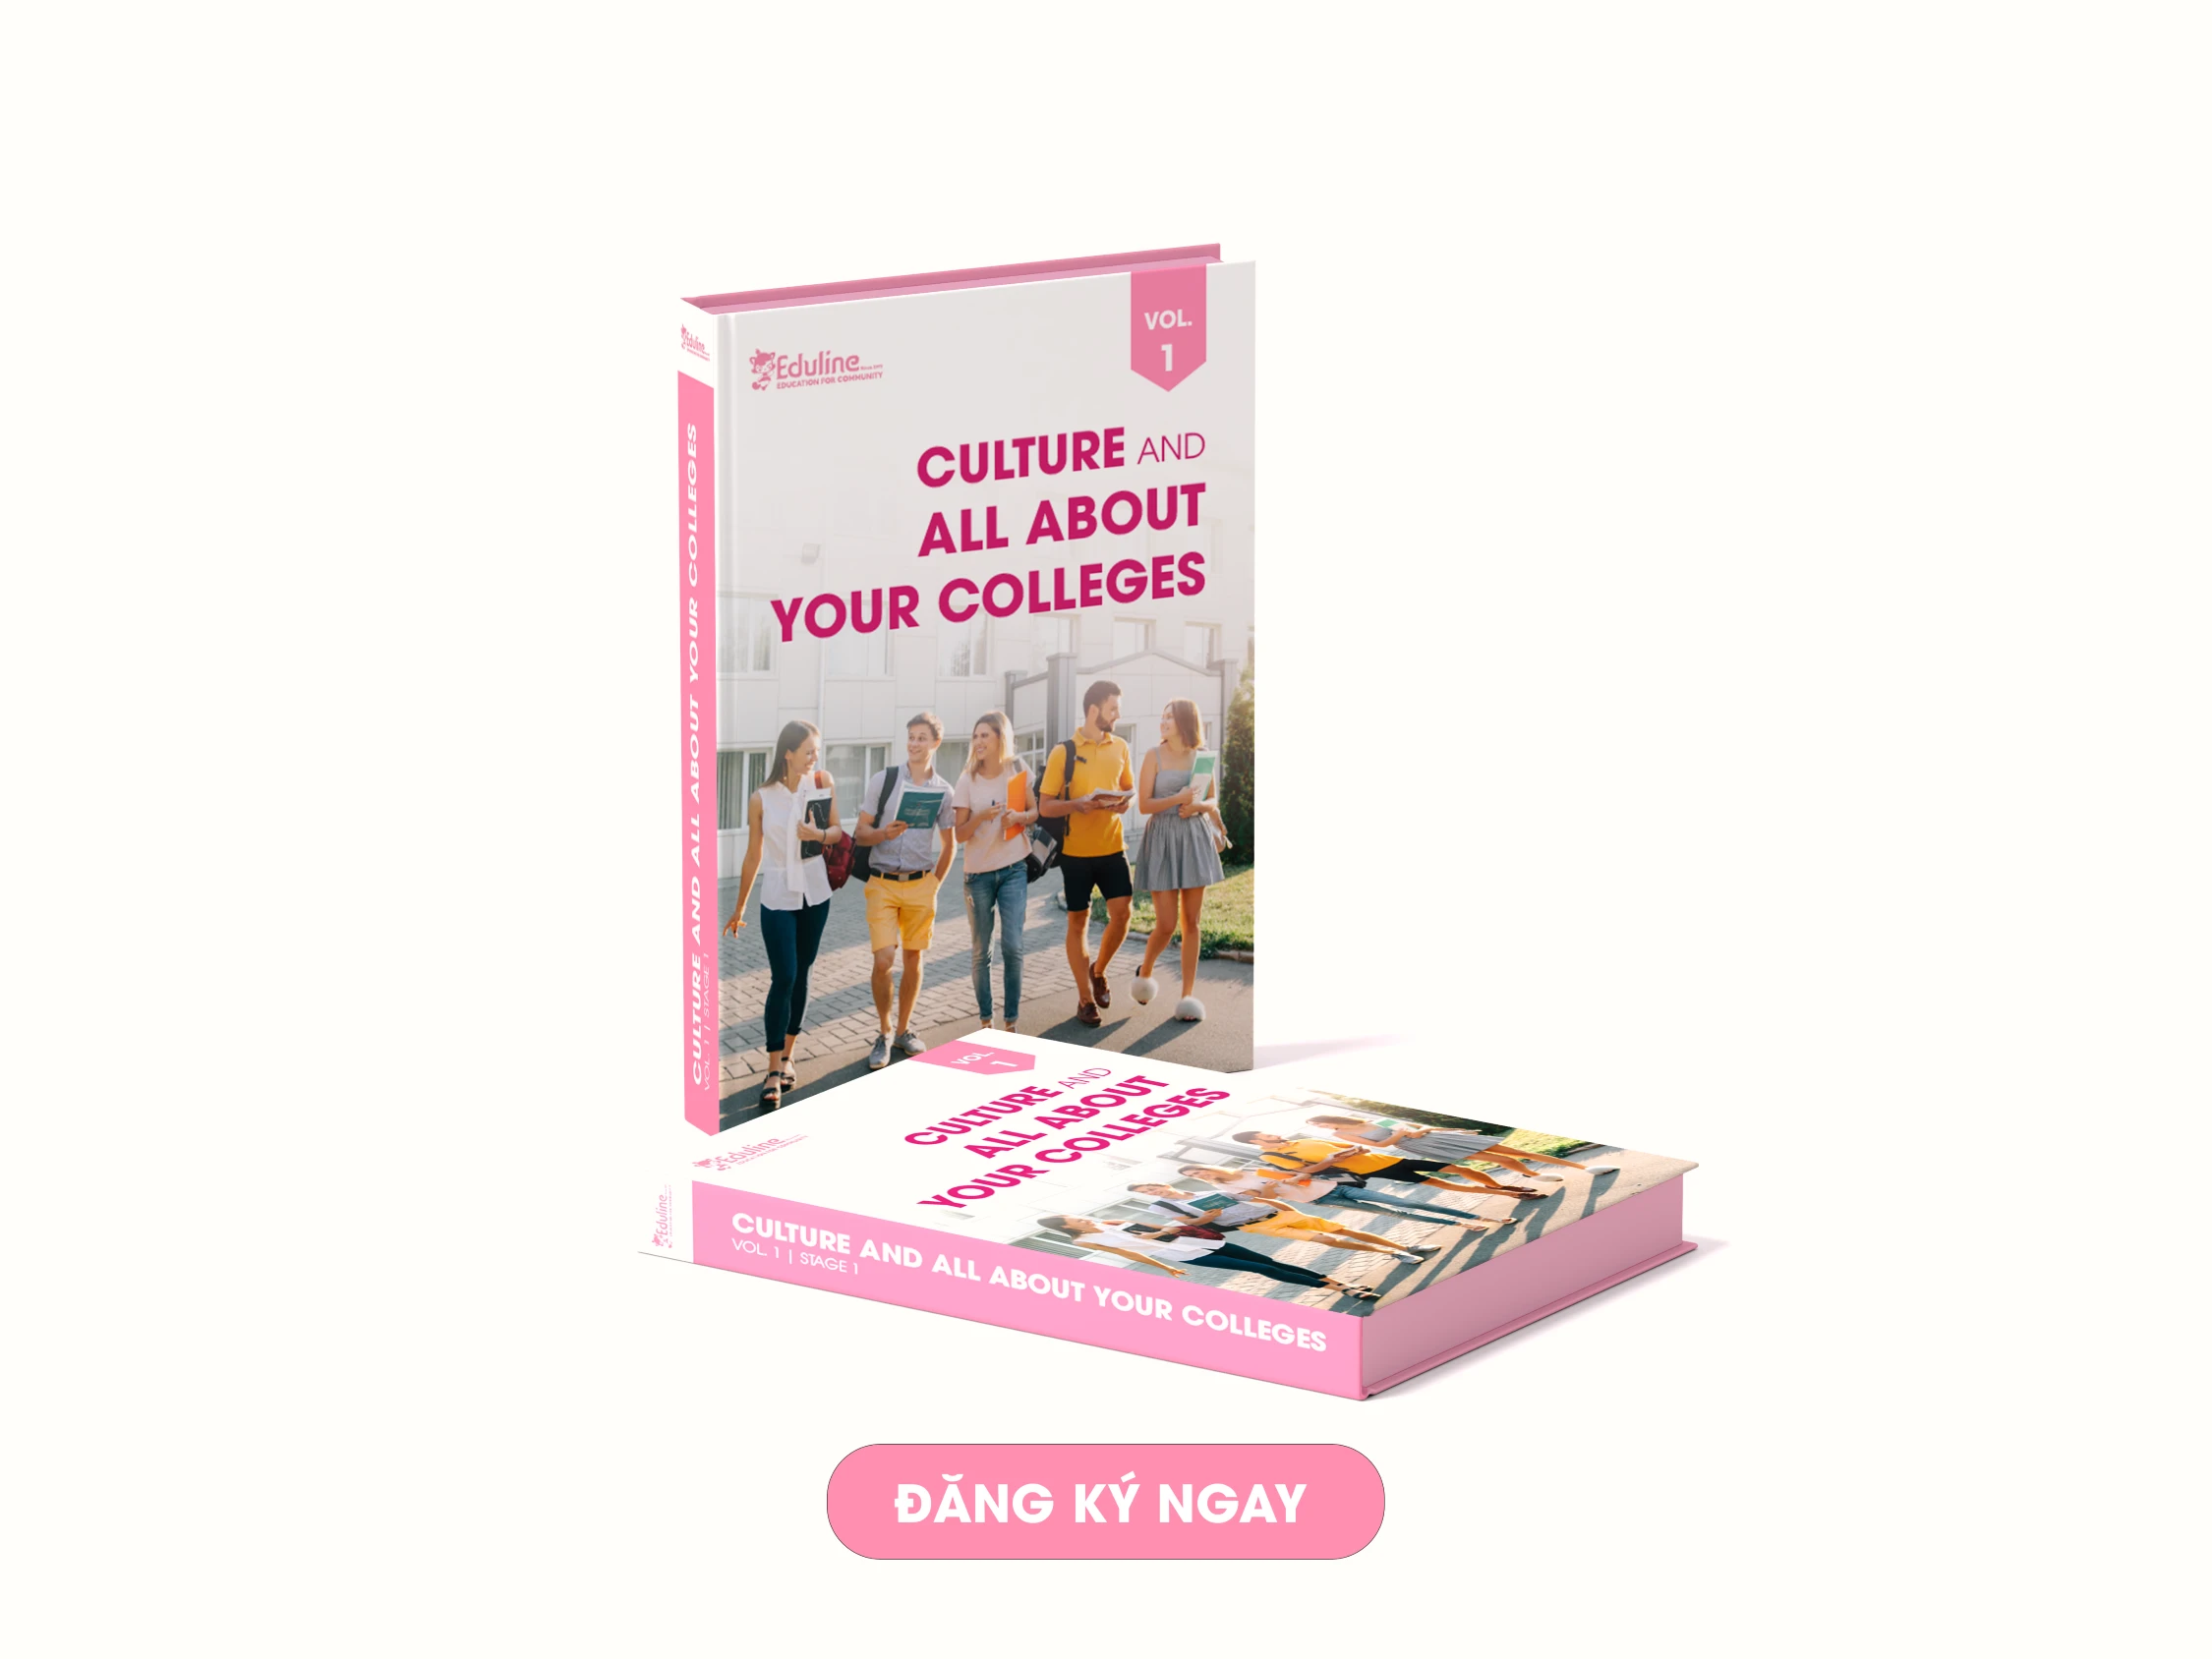 Volume 1: Culture and all about your colleges